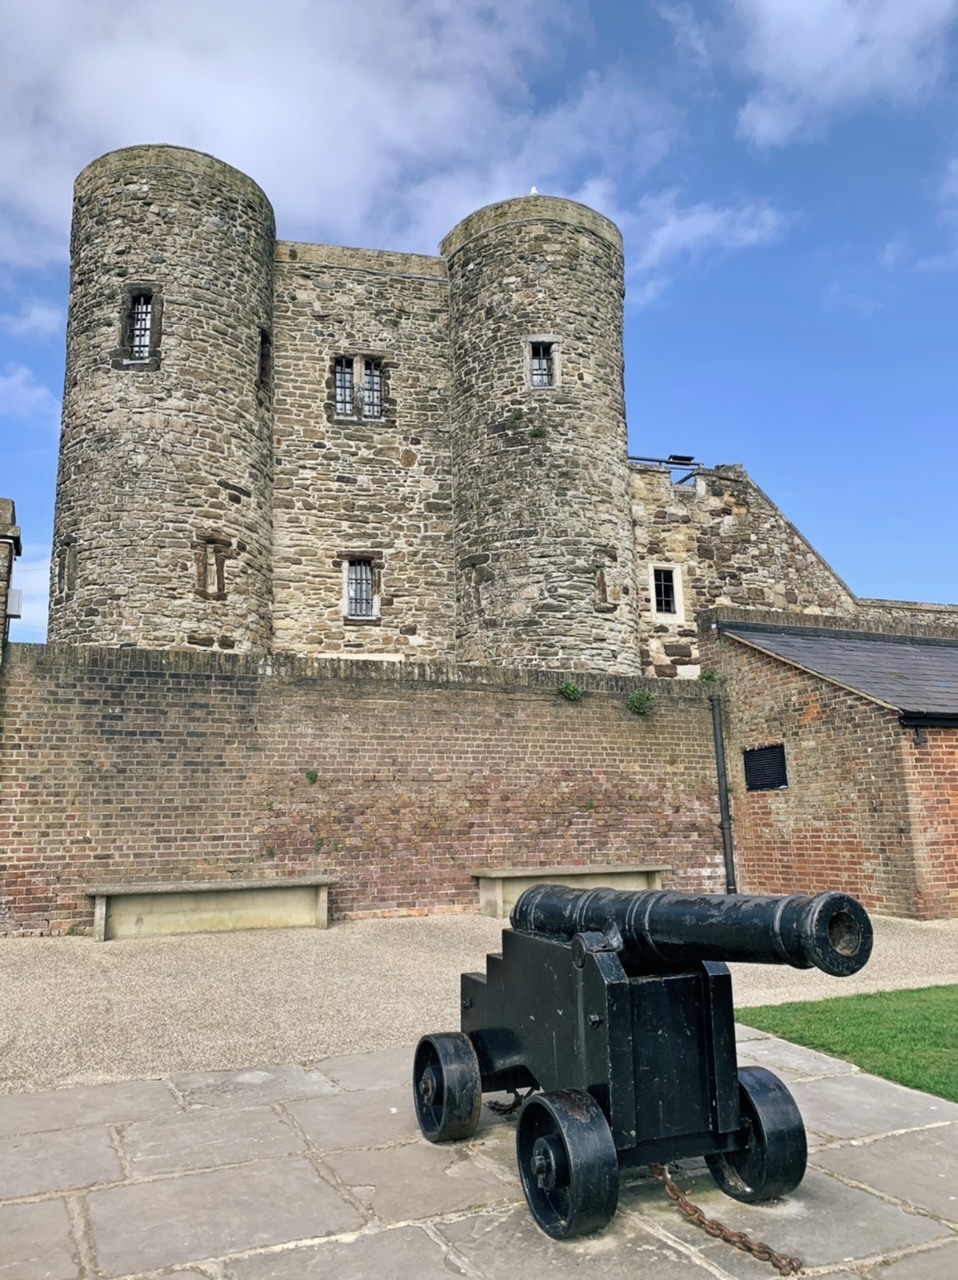 Ypres Tower in Rye, Sussex